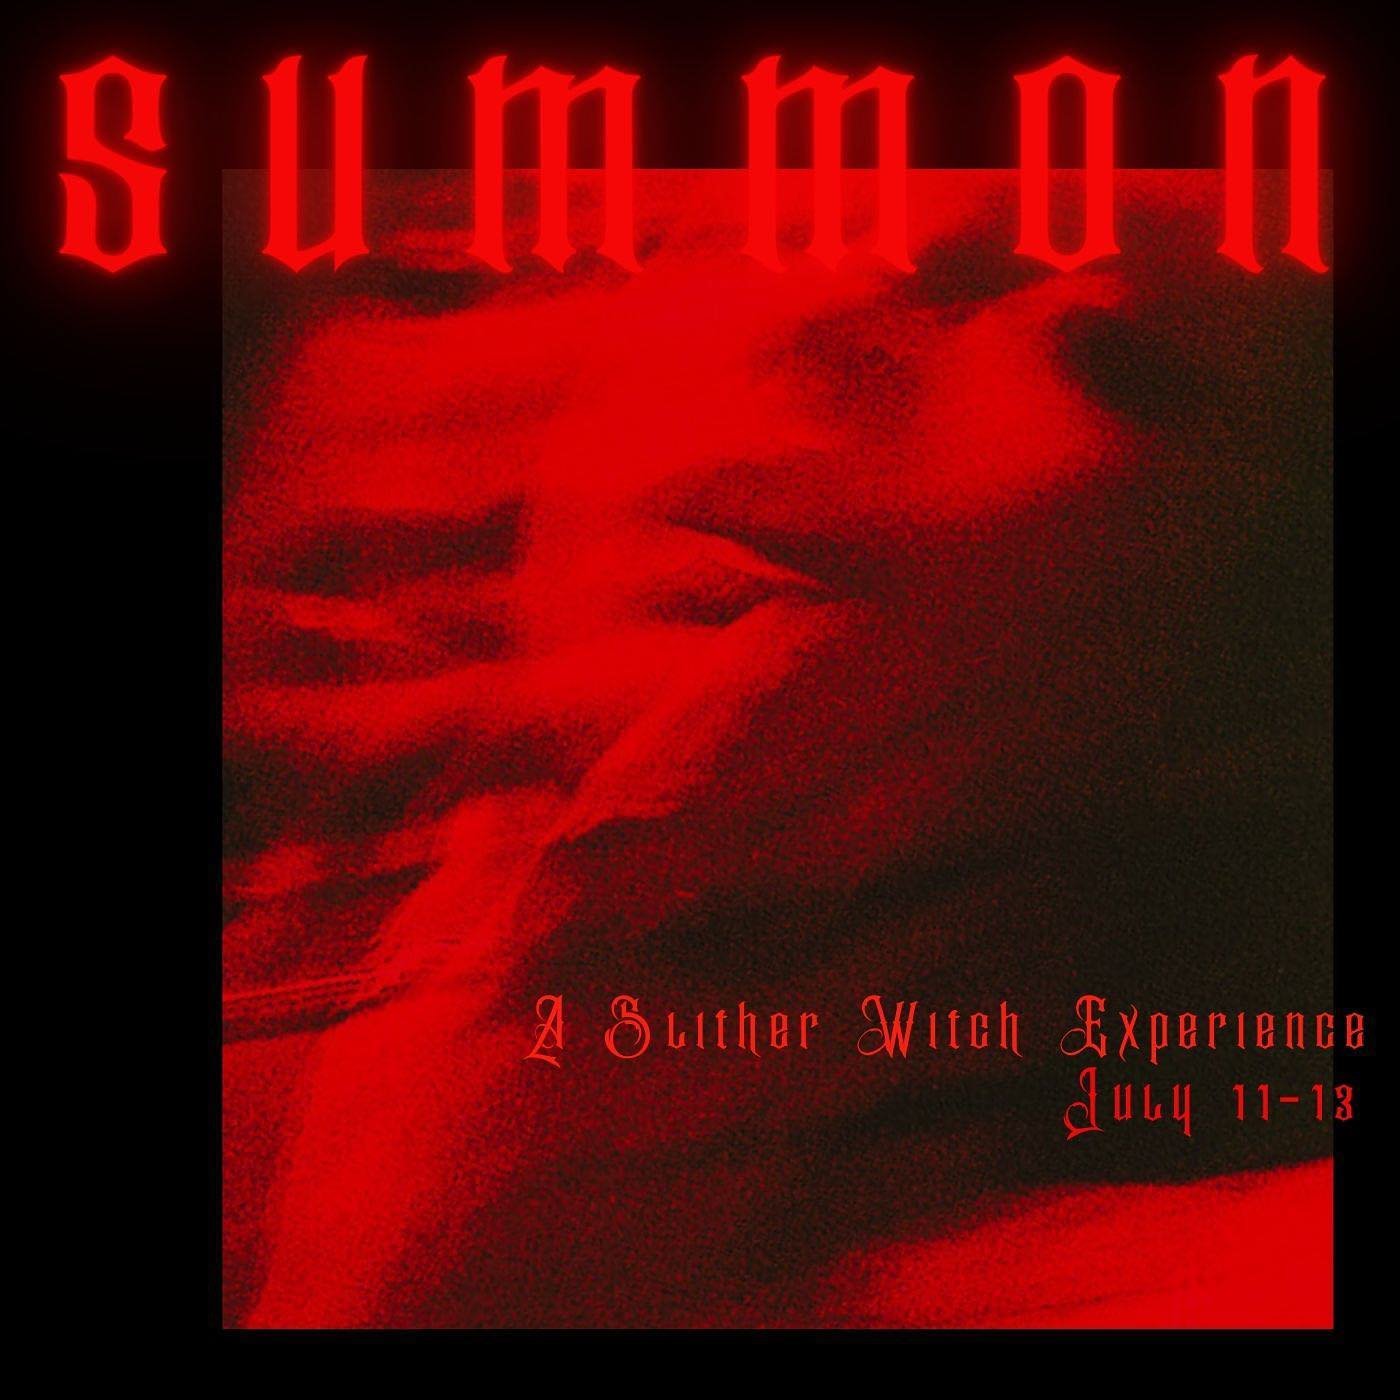 AHH ITS HERE! I&rsquo;m so thrilled to announce my next in person experience SUMMON. 

I have been working on this for months and am so excited (and nervous) to finally bring it into the world. 

Join me 7/11-7/13 in San Diego for a 3 day sensual mov